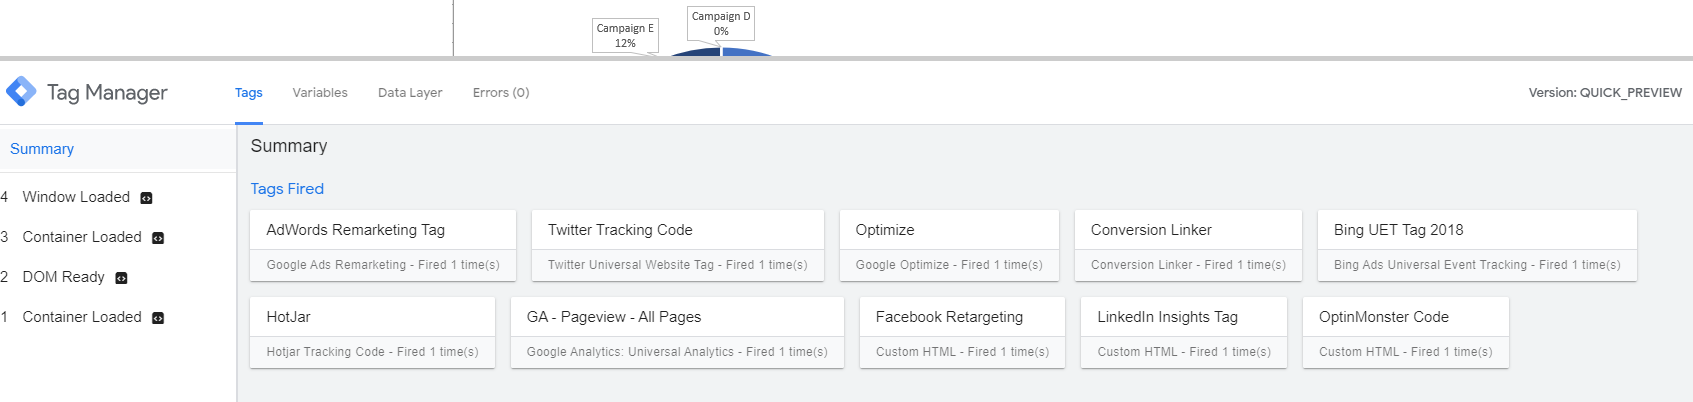 button tracking with google tag manager and google analytics